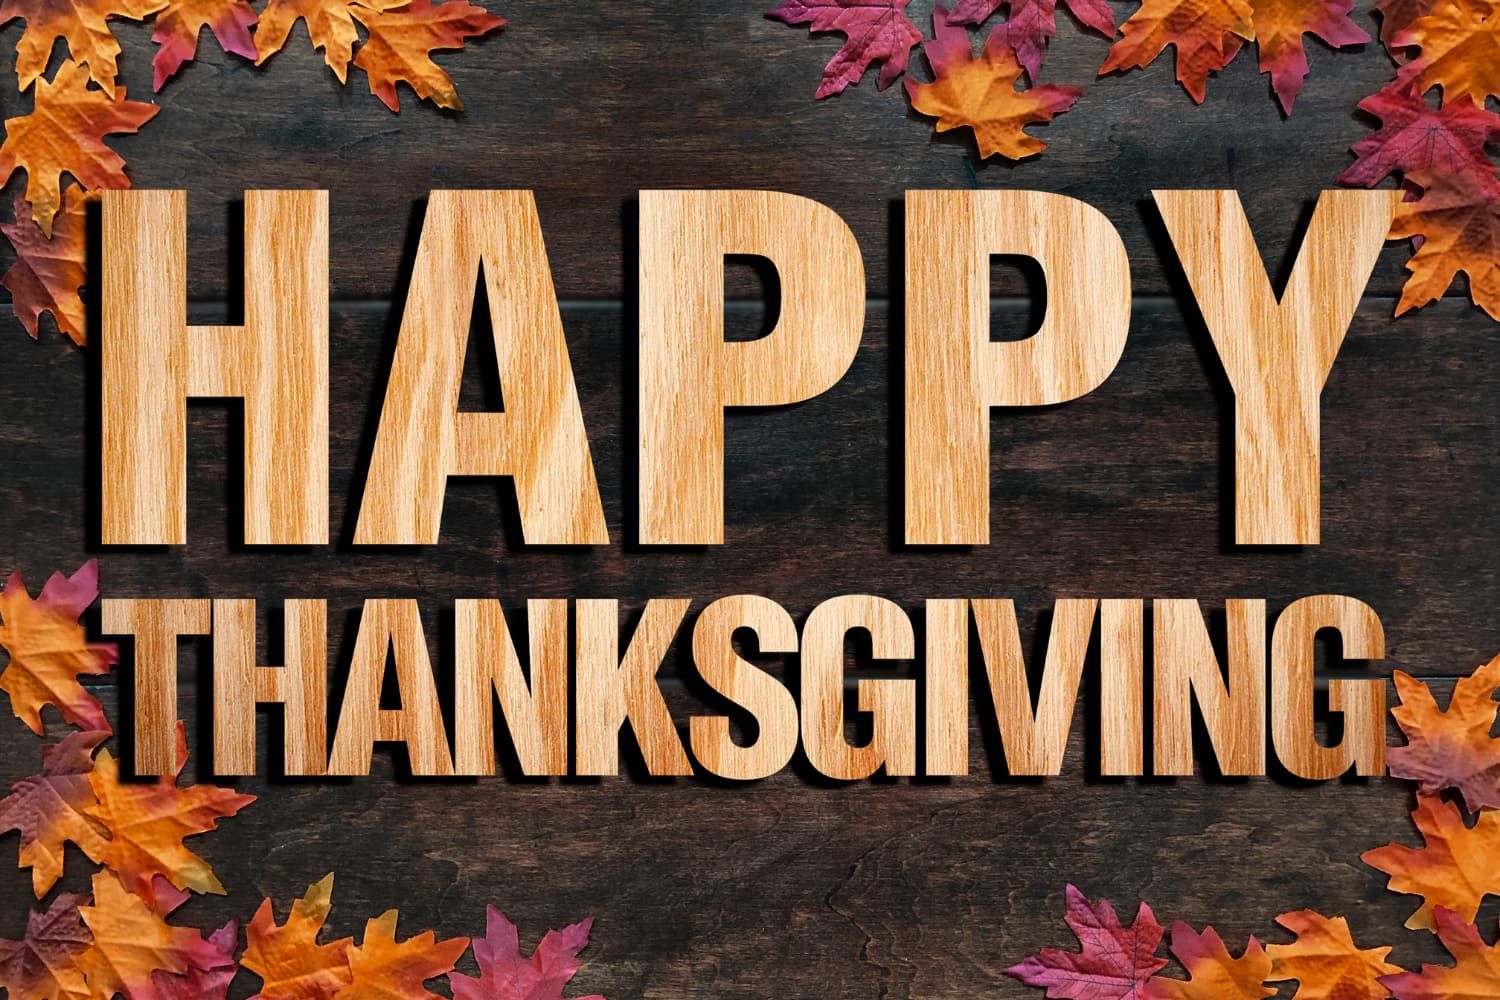 TH%2014-435a5bac Thanksgiving Day